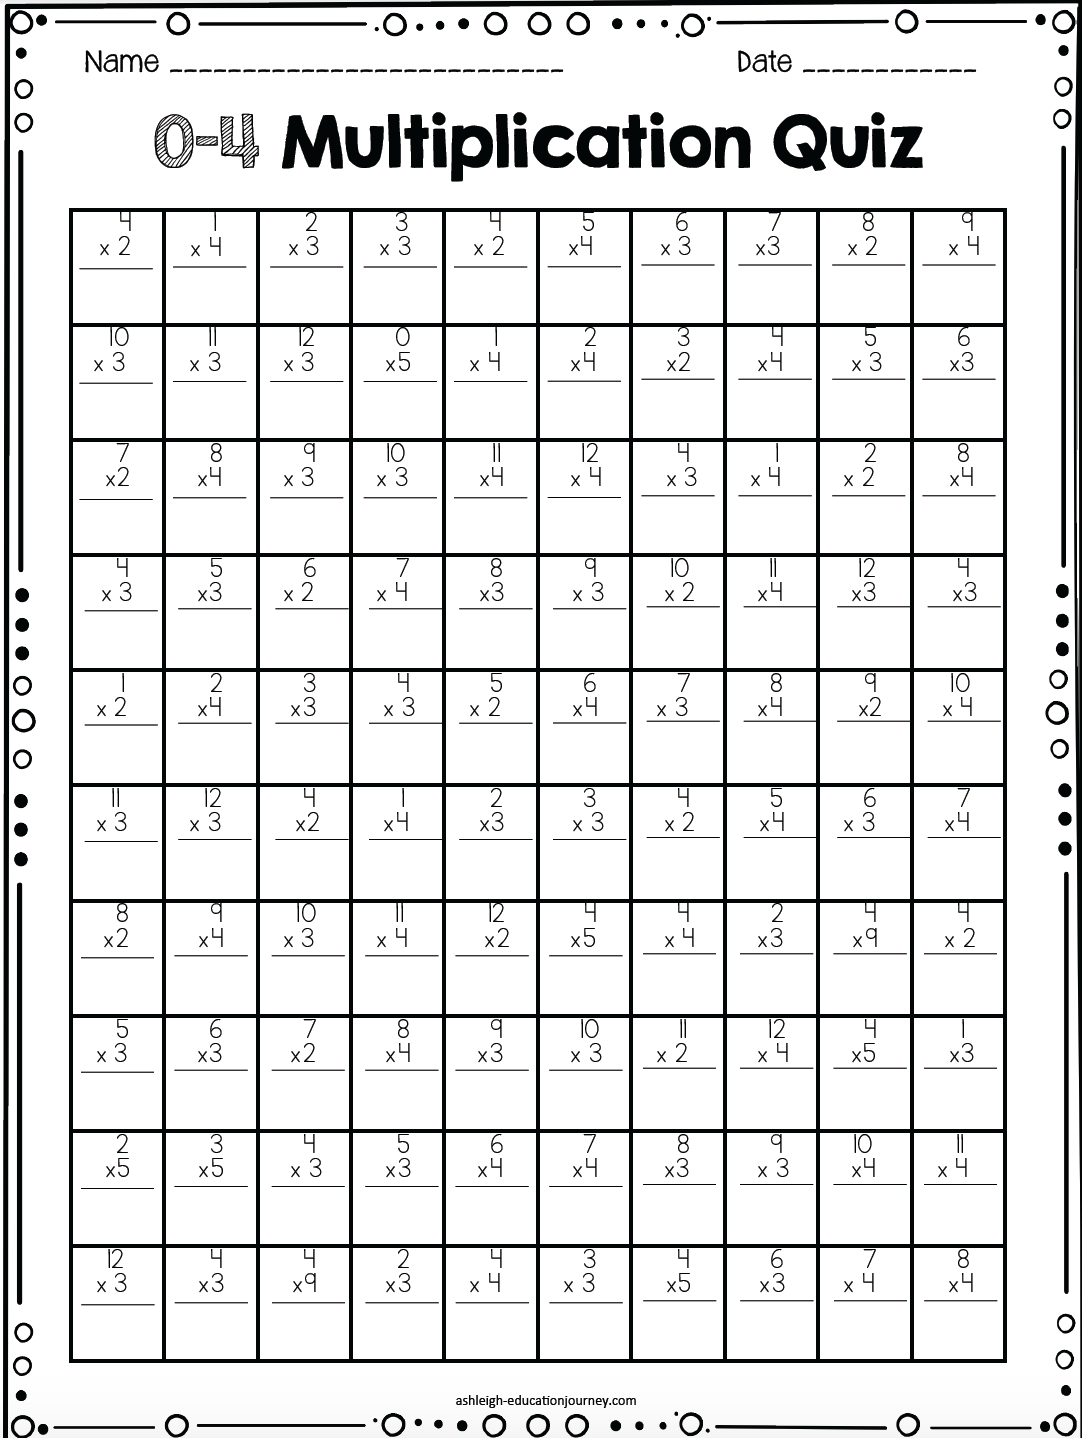 multiplication-facts-0-12-printable-quiz